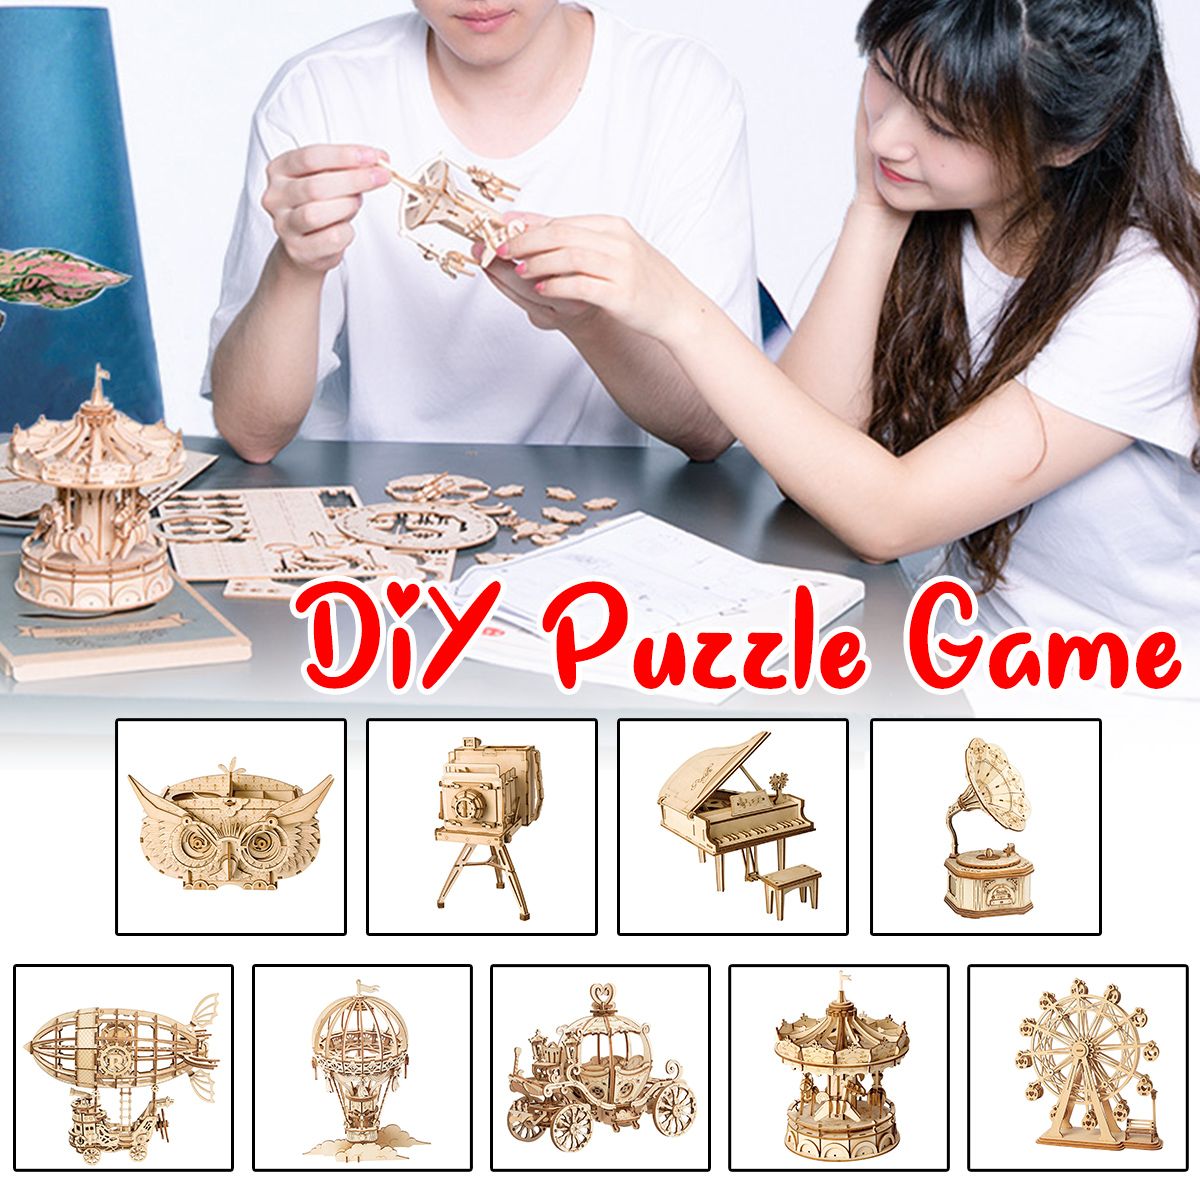 DIY-3D-Wooden-Natural-Puzzle-Game-Assembly-Popular-Toys-Gift-Jigsaw-Puzzle-Toy-for-Children-1608446